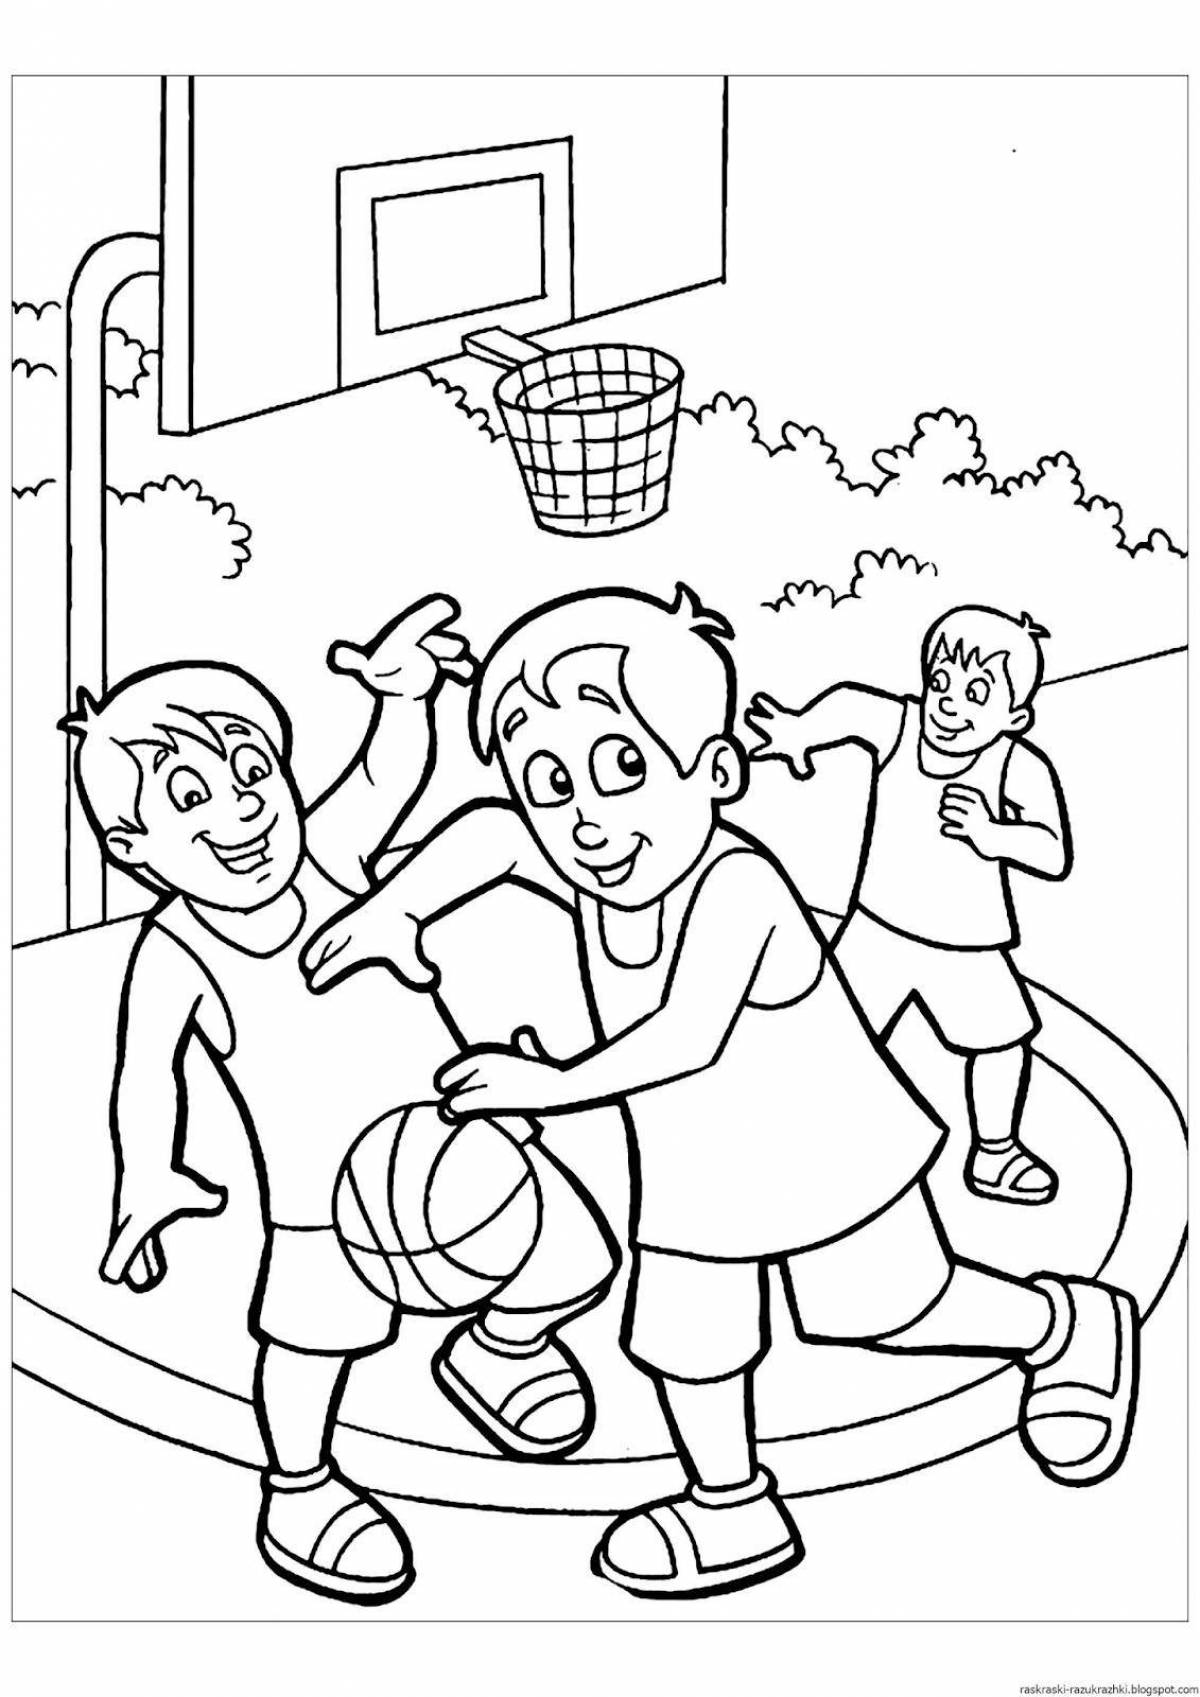 Awesome sports coloring pages for 6-7 year olds